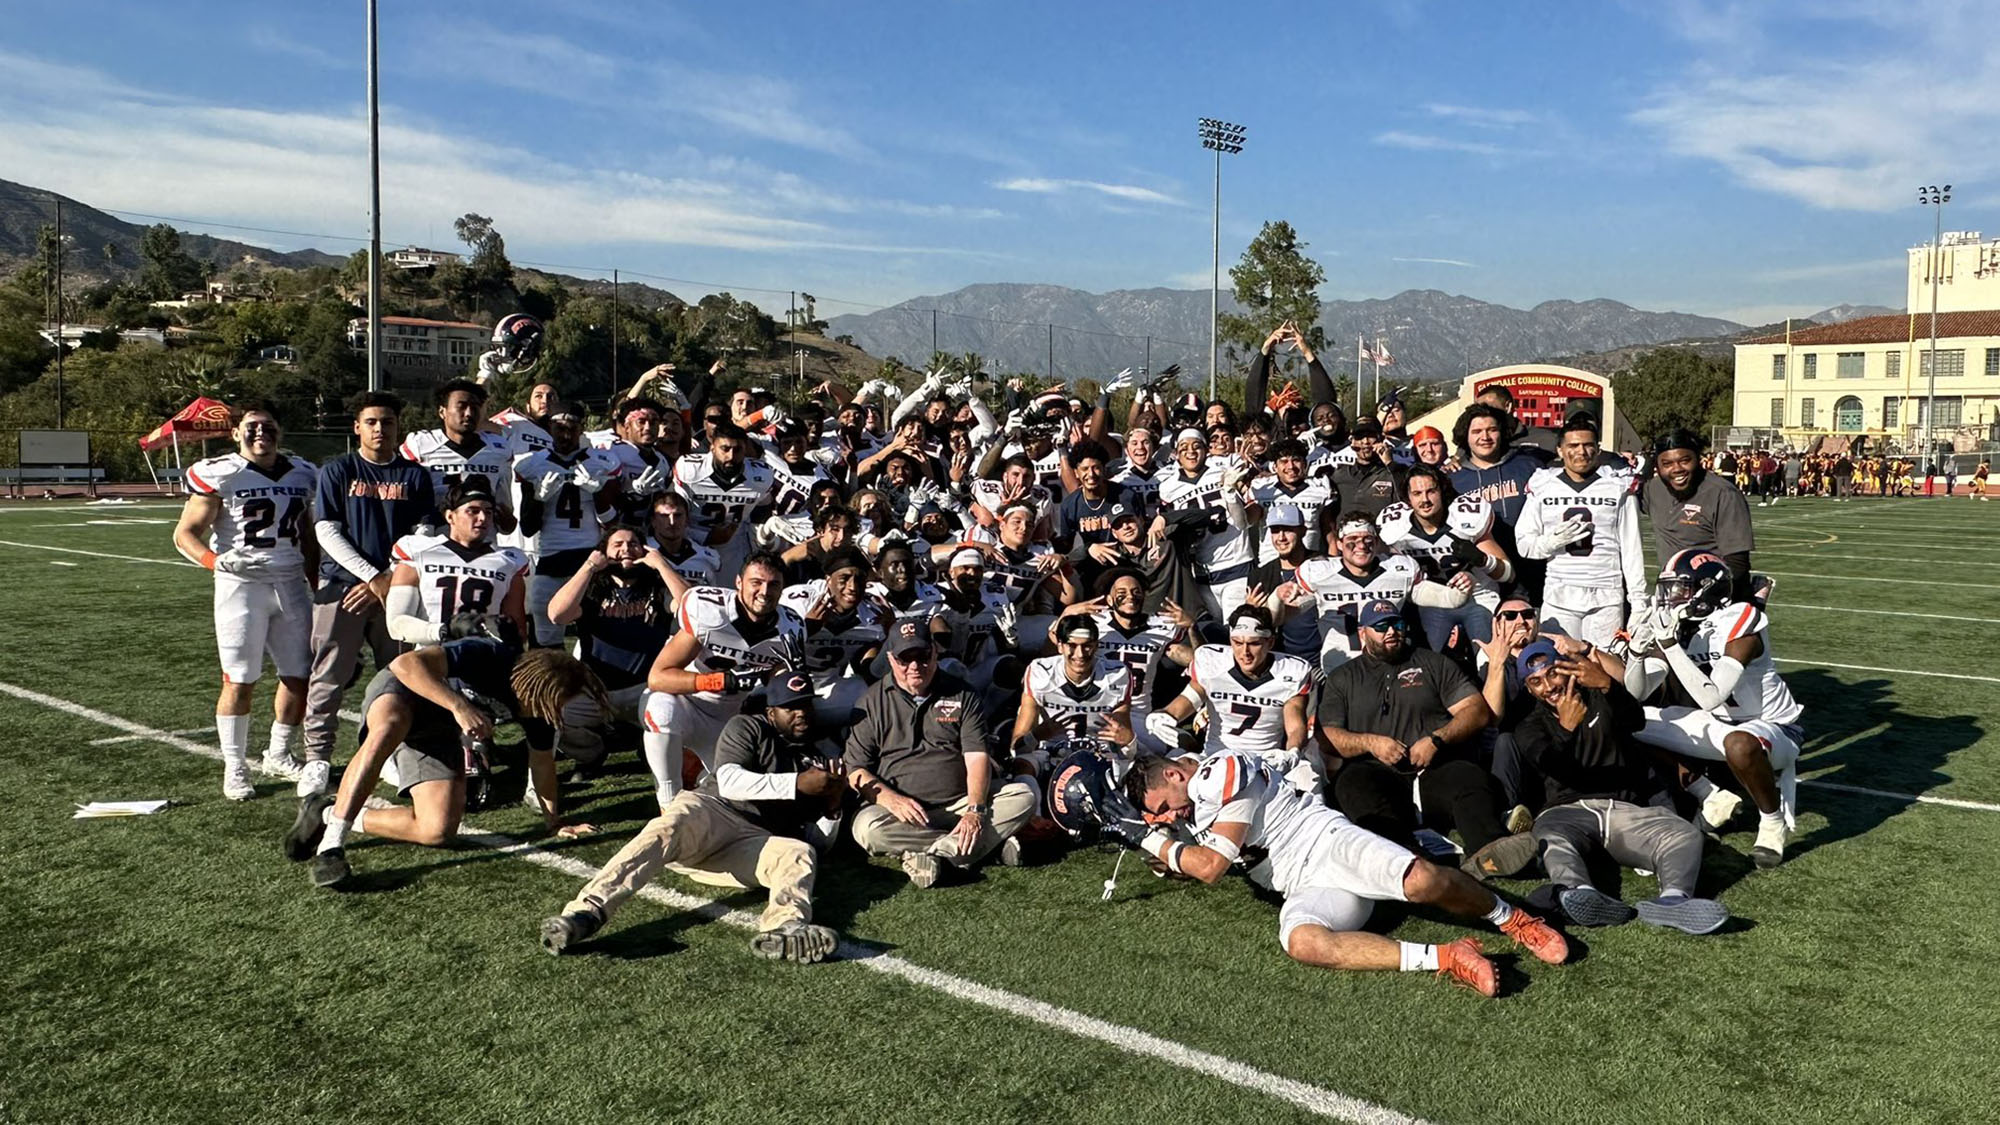 Citrus won its first conference championship since 2006 with a 42-21 victory over Glendale College.